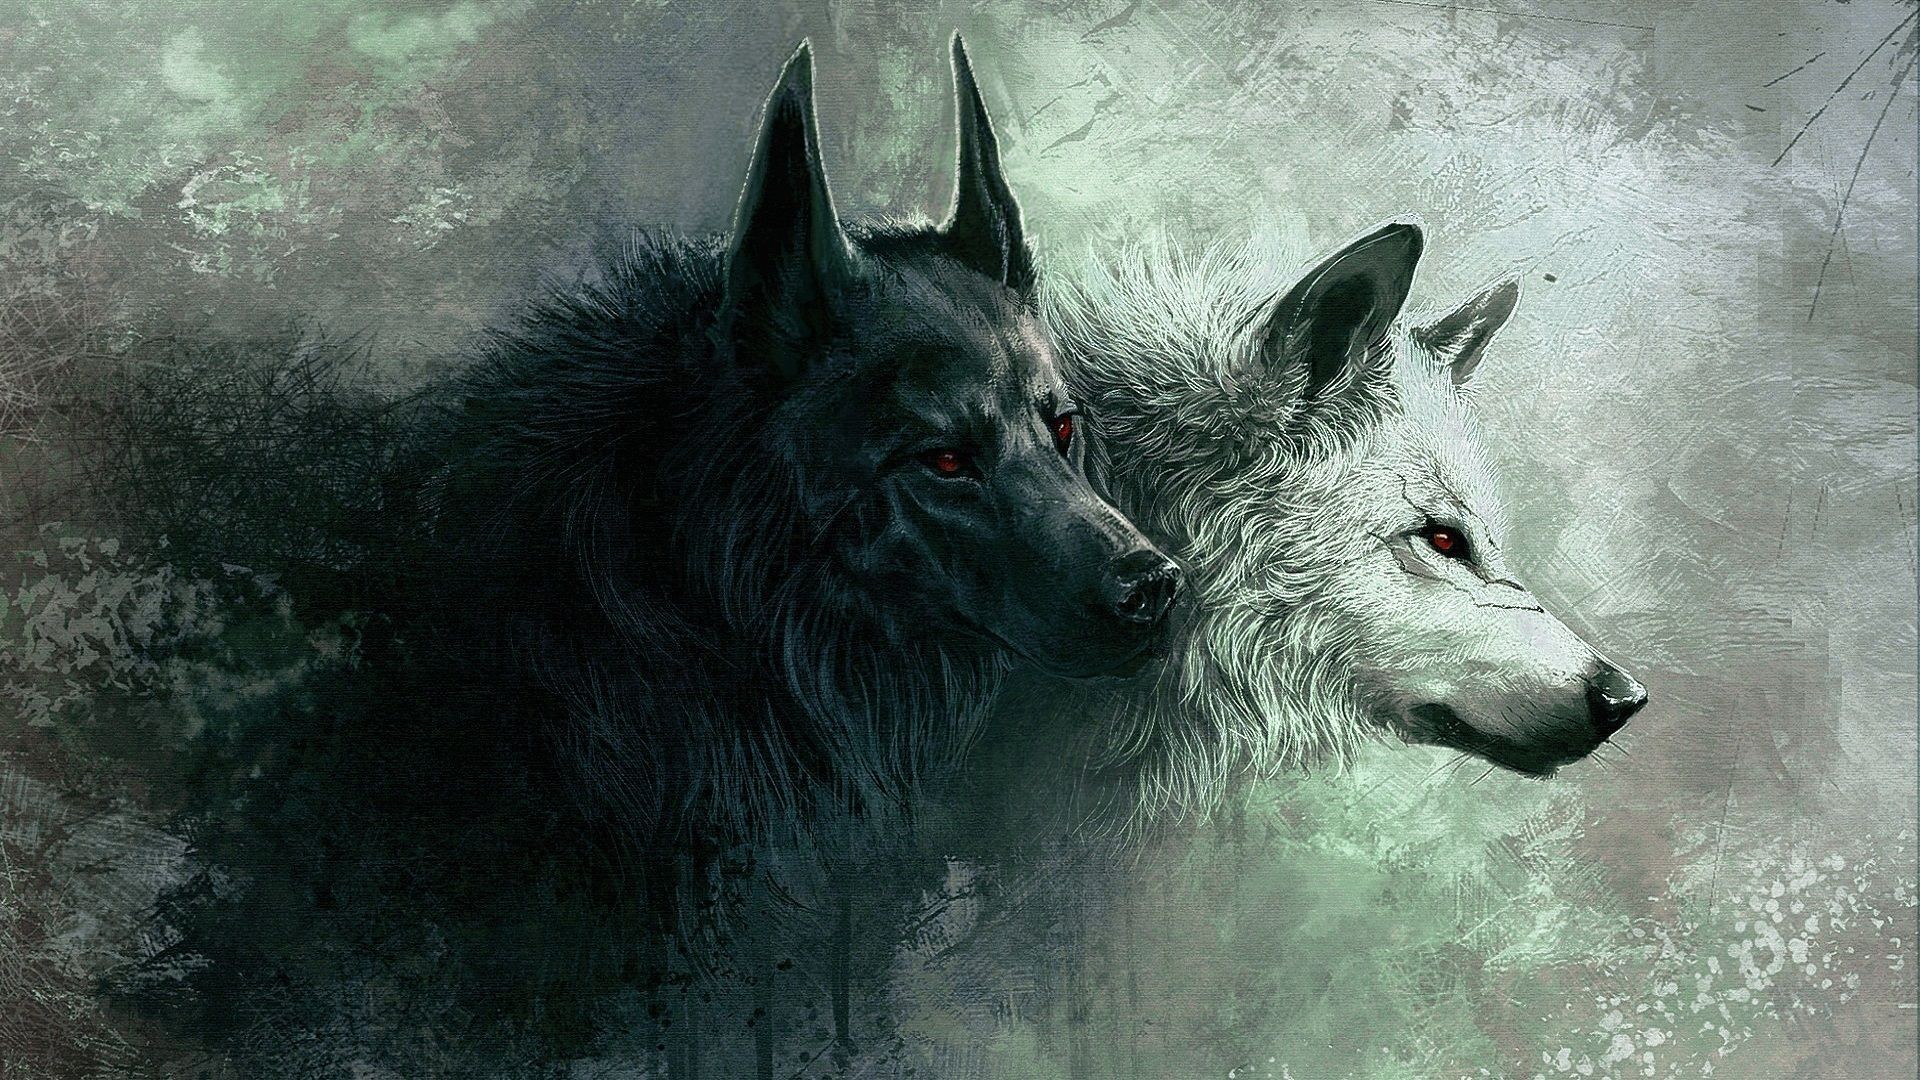 1920x1080 Search Results for “wolf angry wallpaper” – Adorable Wallpapers